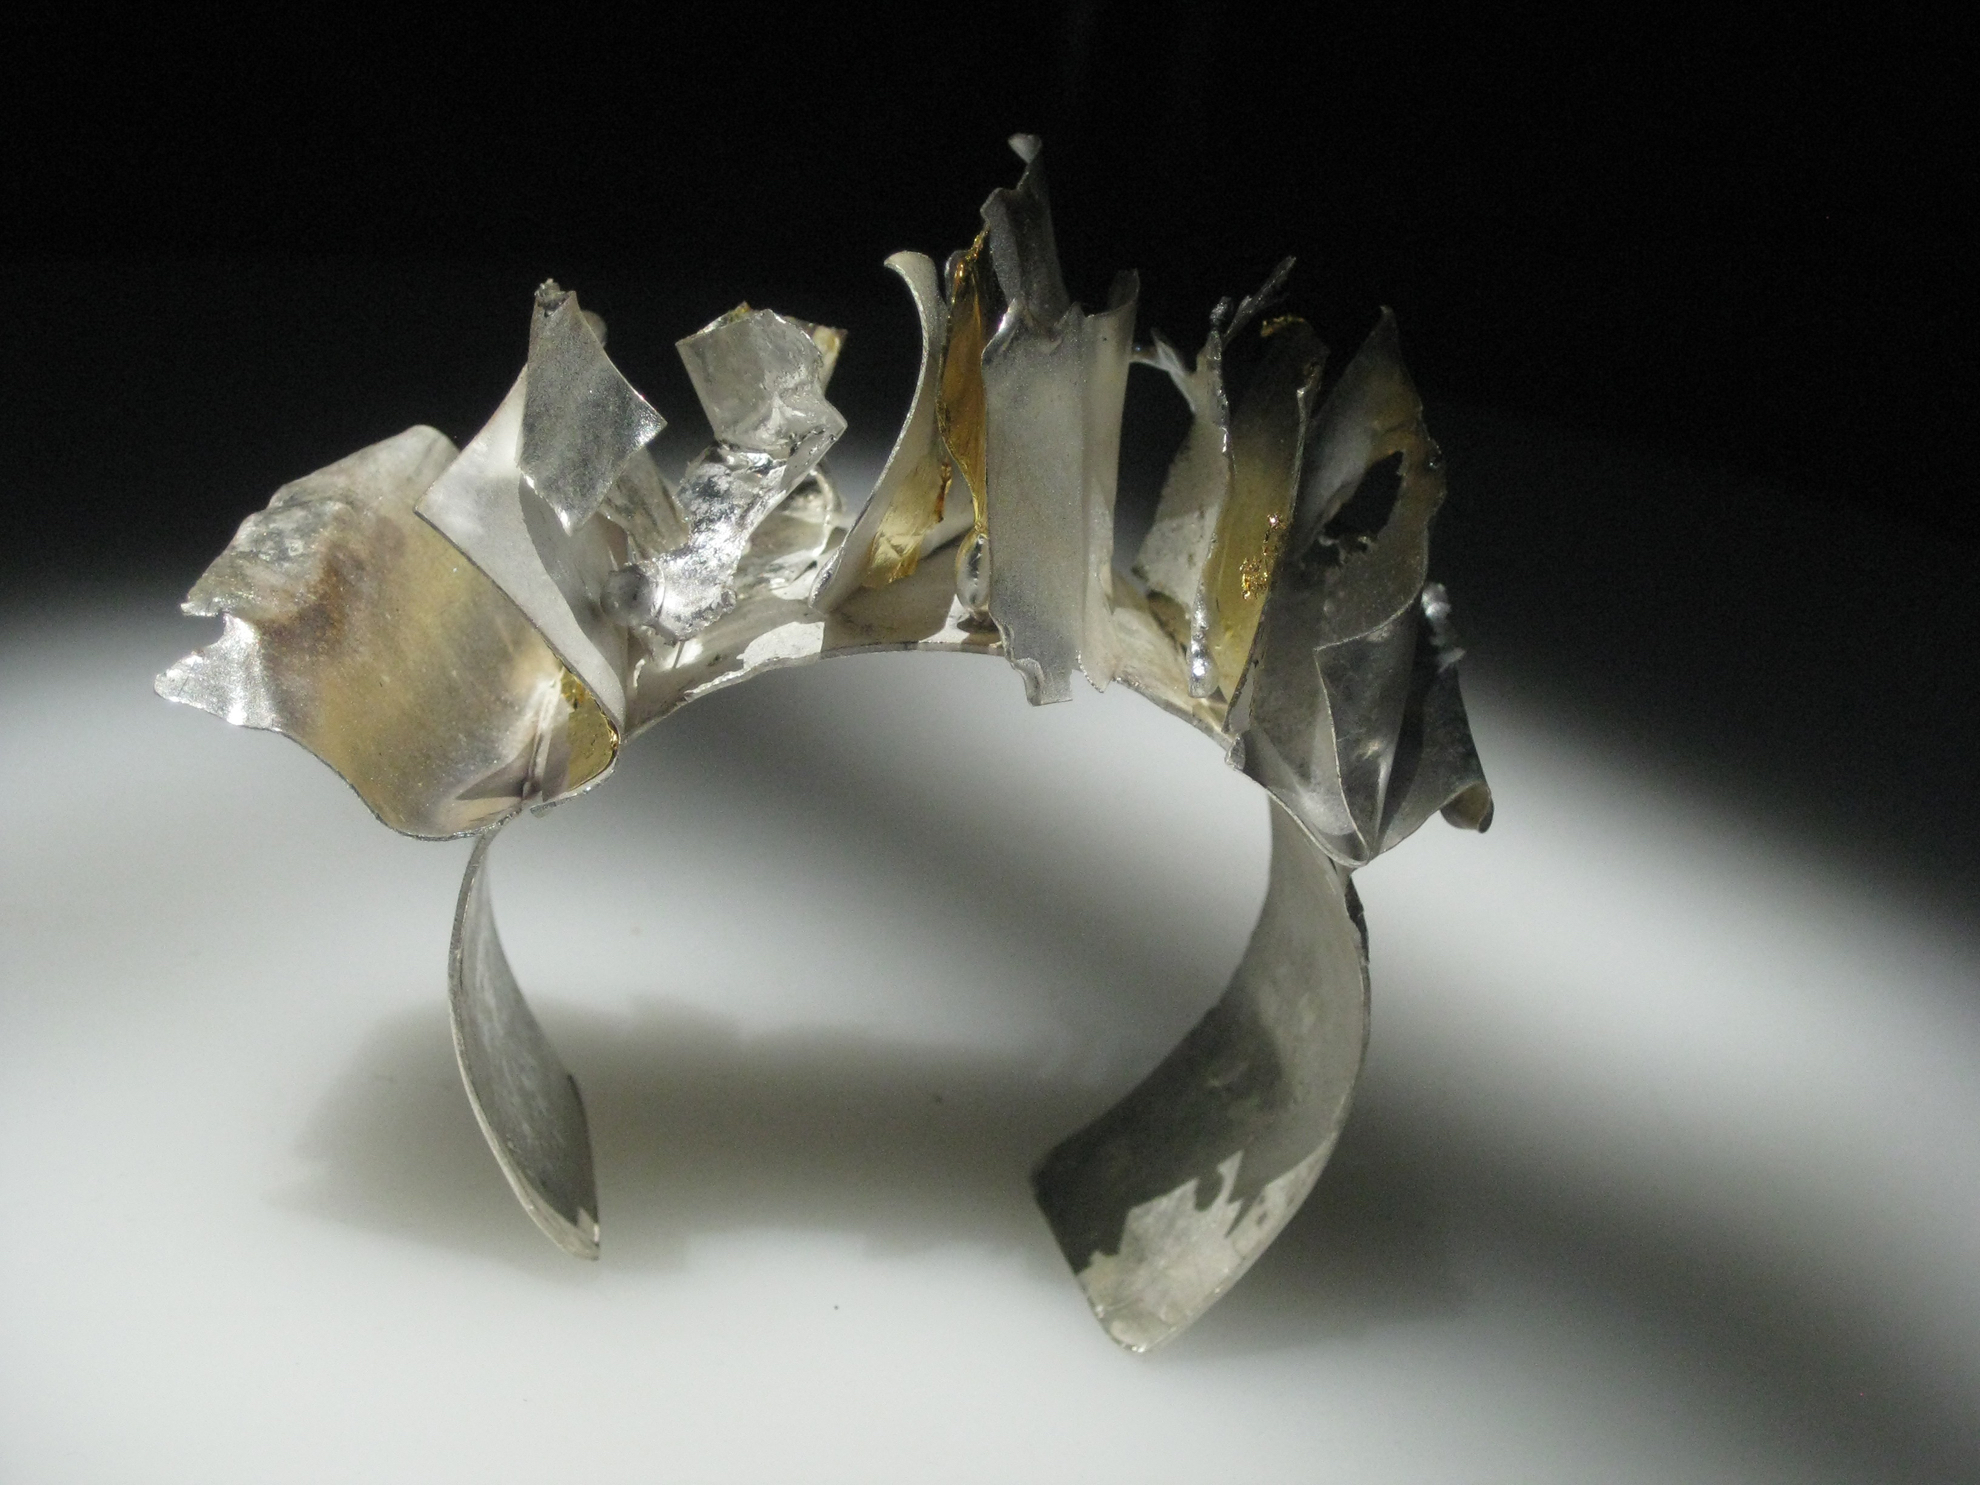 Leaves Cuff Fine silver and 22kt gold keum boo leaves $600